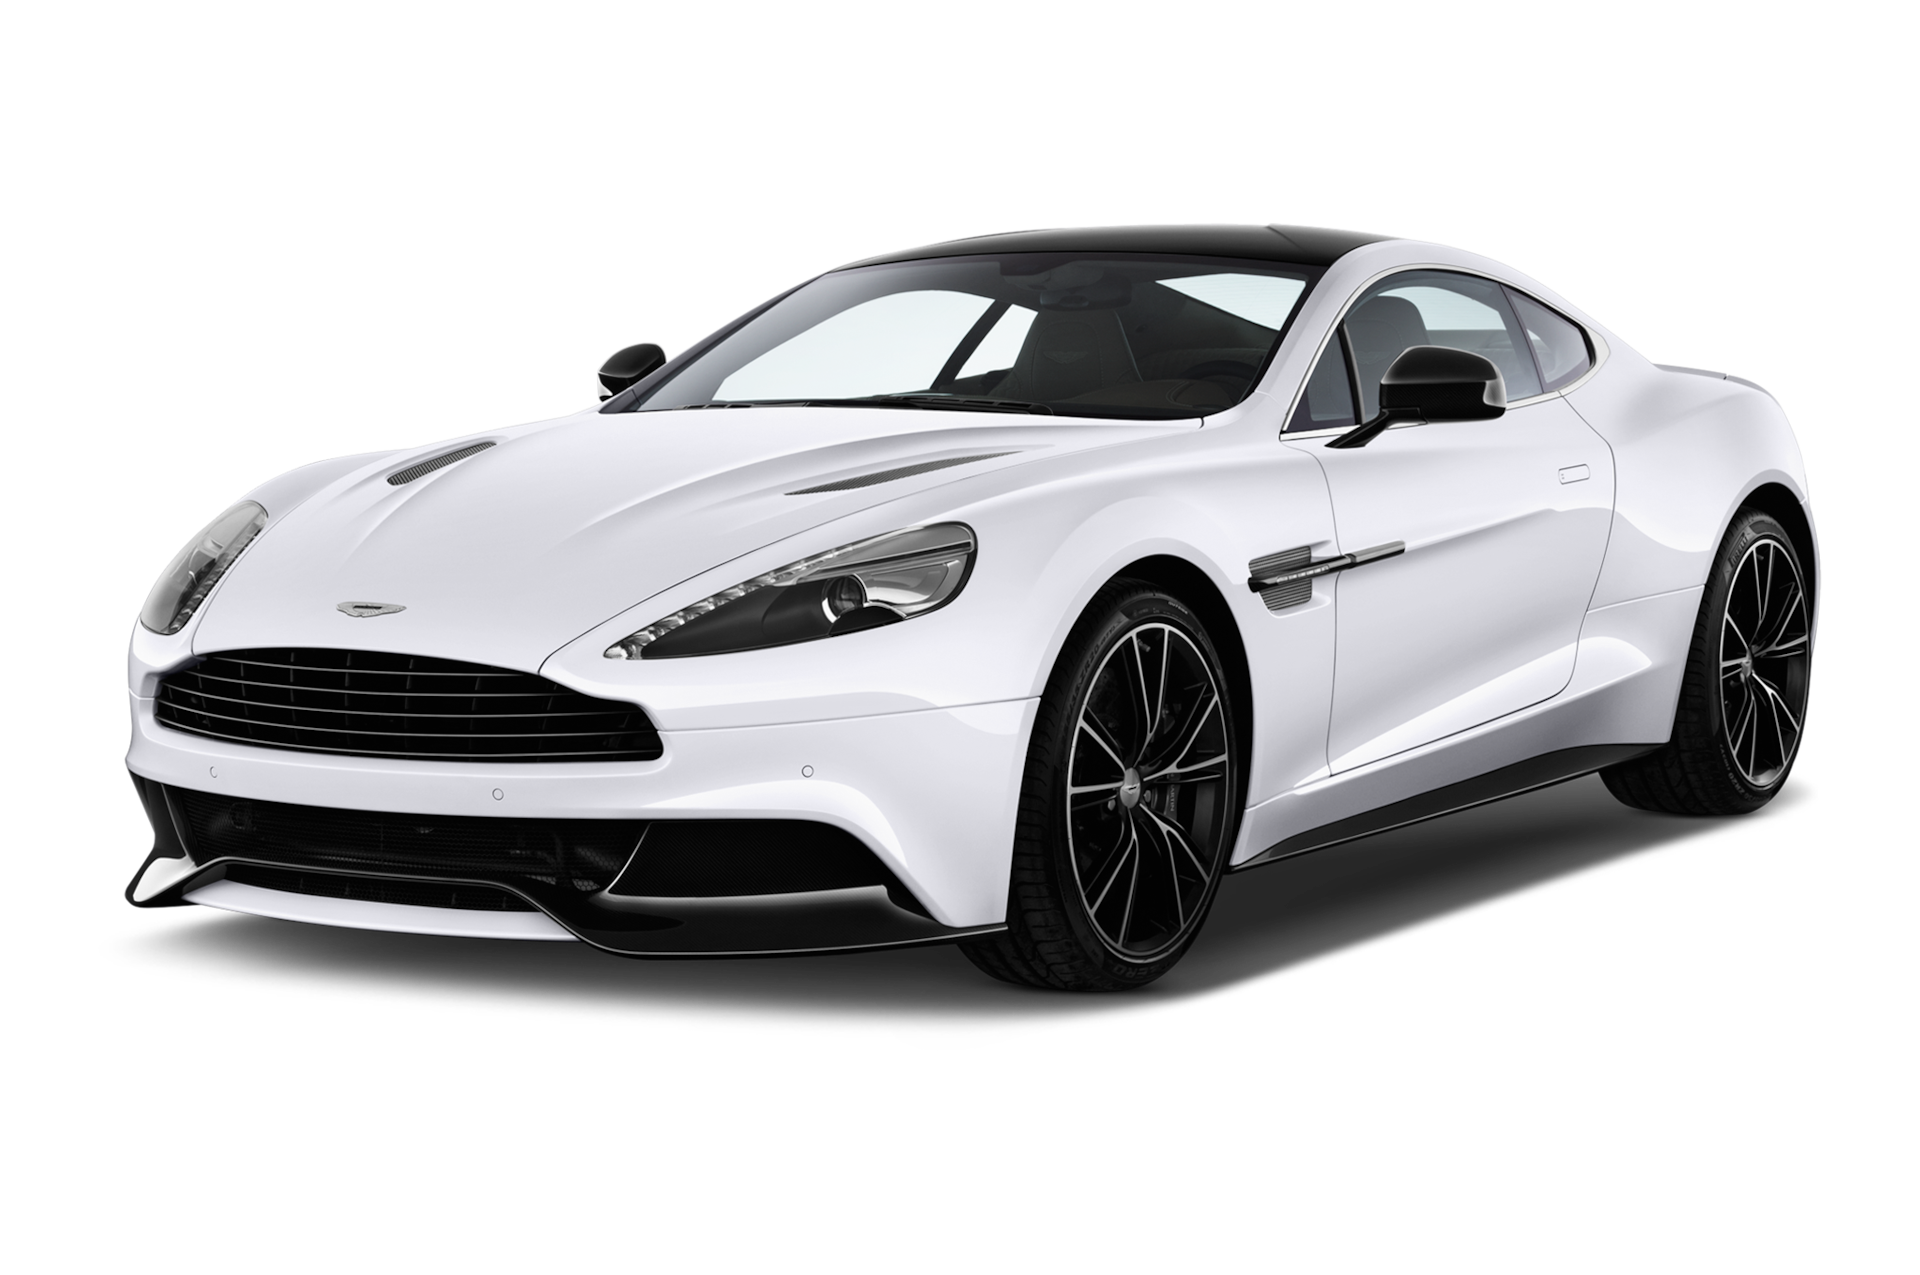 2015 Aston Martin Vanquish Prices, Reviews, and Photos - MotorTrend